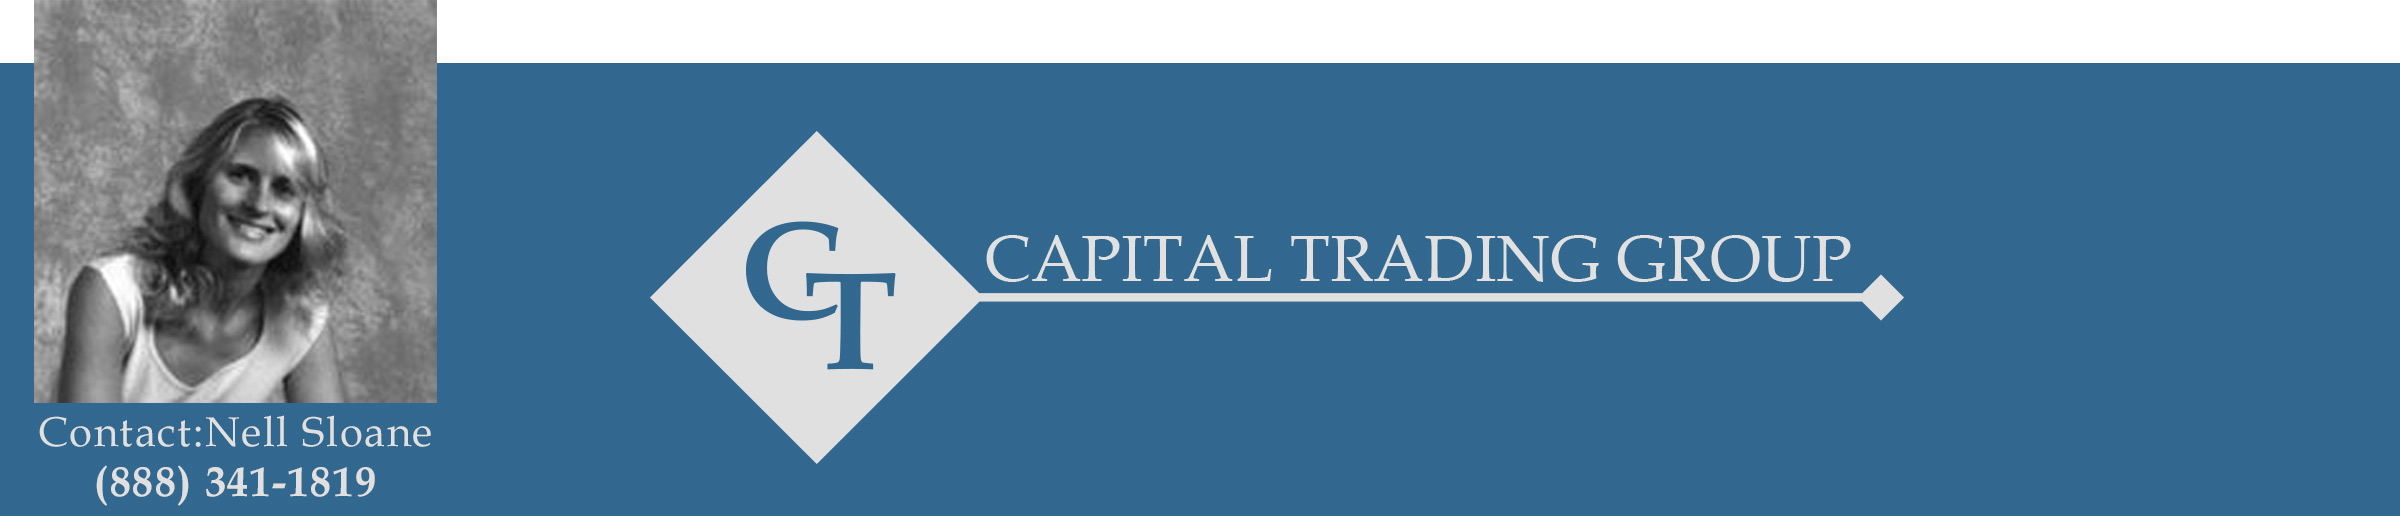 Capital Trading Group Nell Sloane